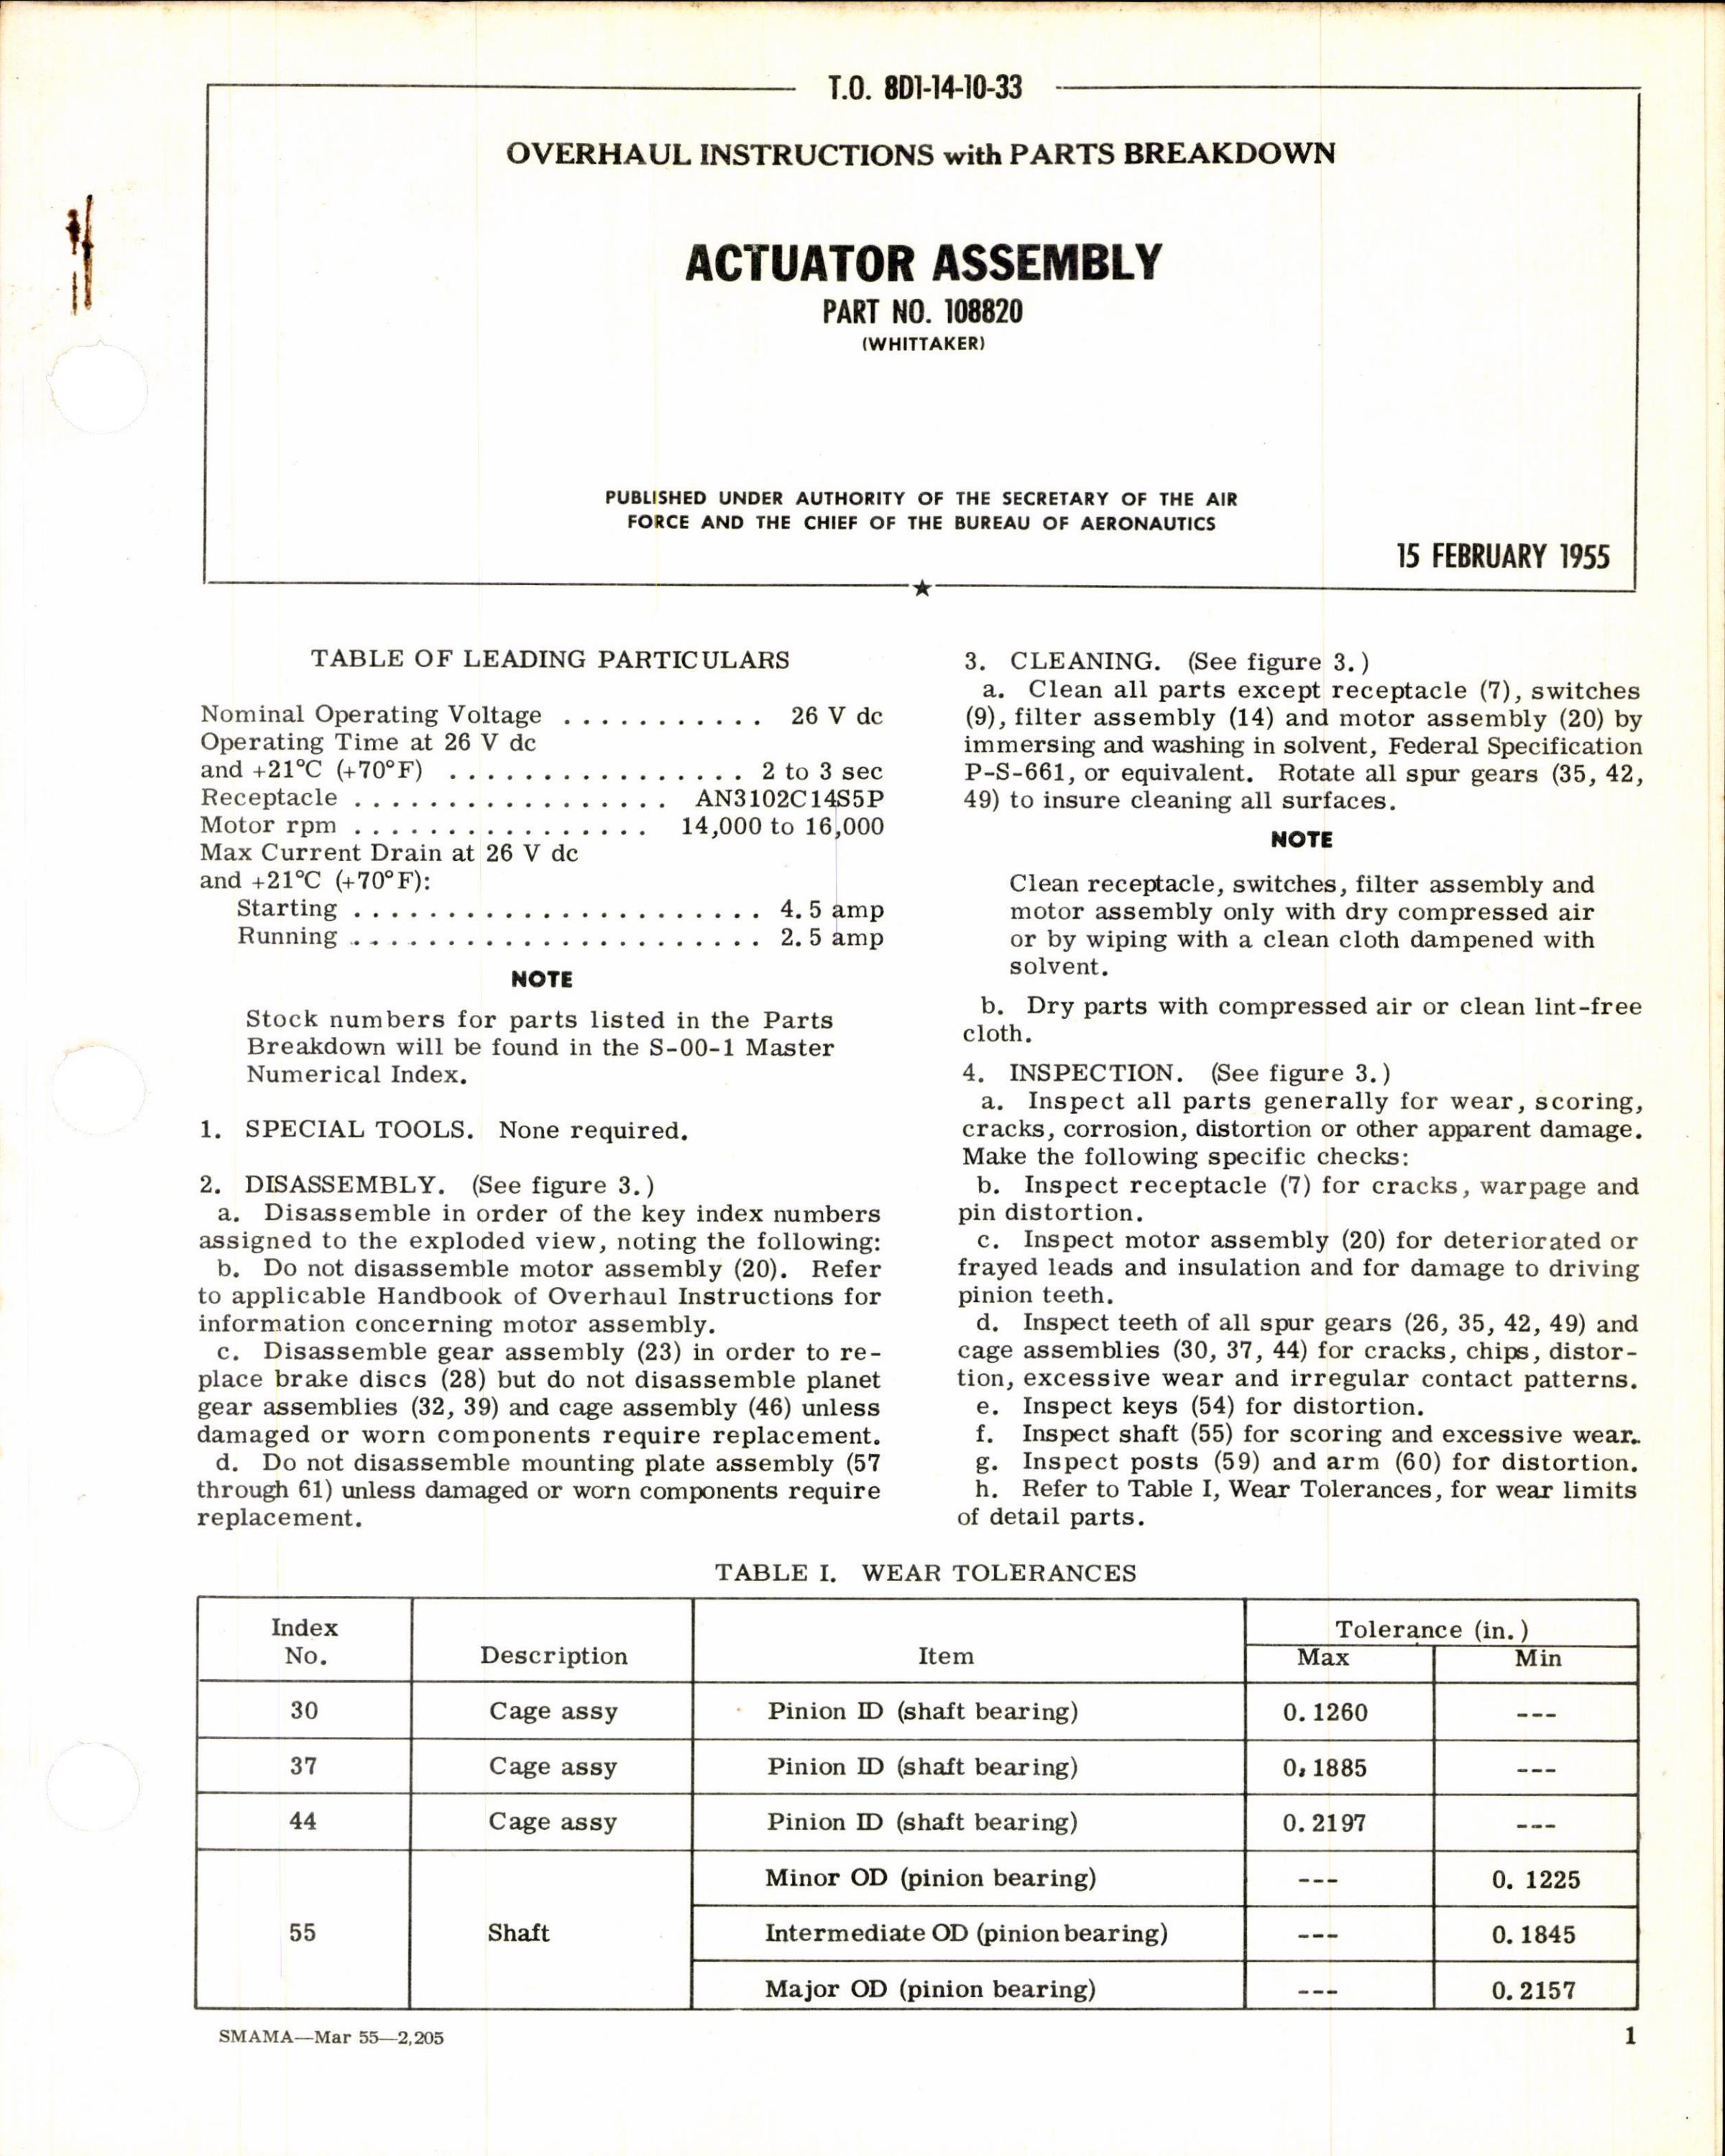 Sample page 1 from AirCorps Library document: Instructions w Parts Breakdown for Actuator Assembly Part 108820